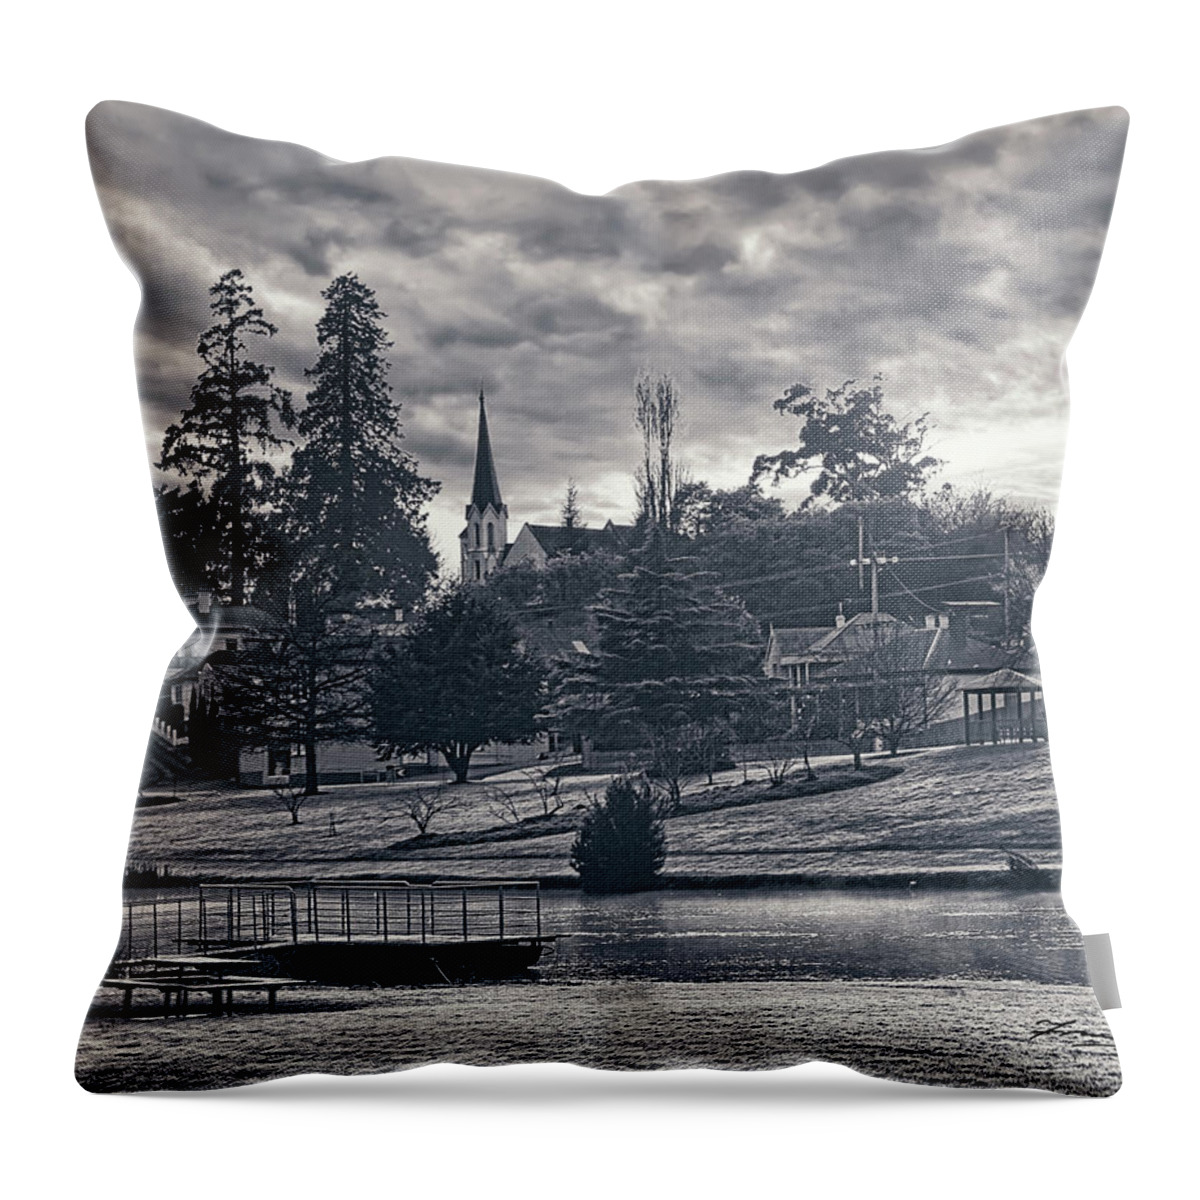 Australia Throw Pillow featuring the photograph Small Town by Frank Lee